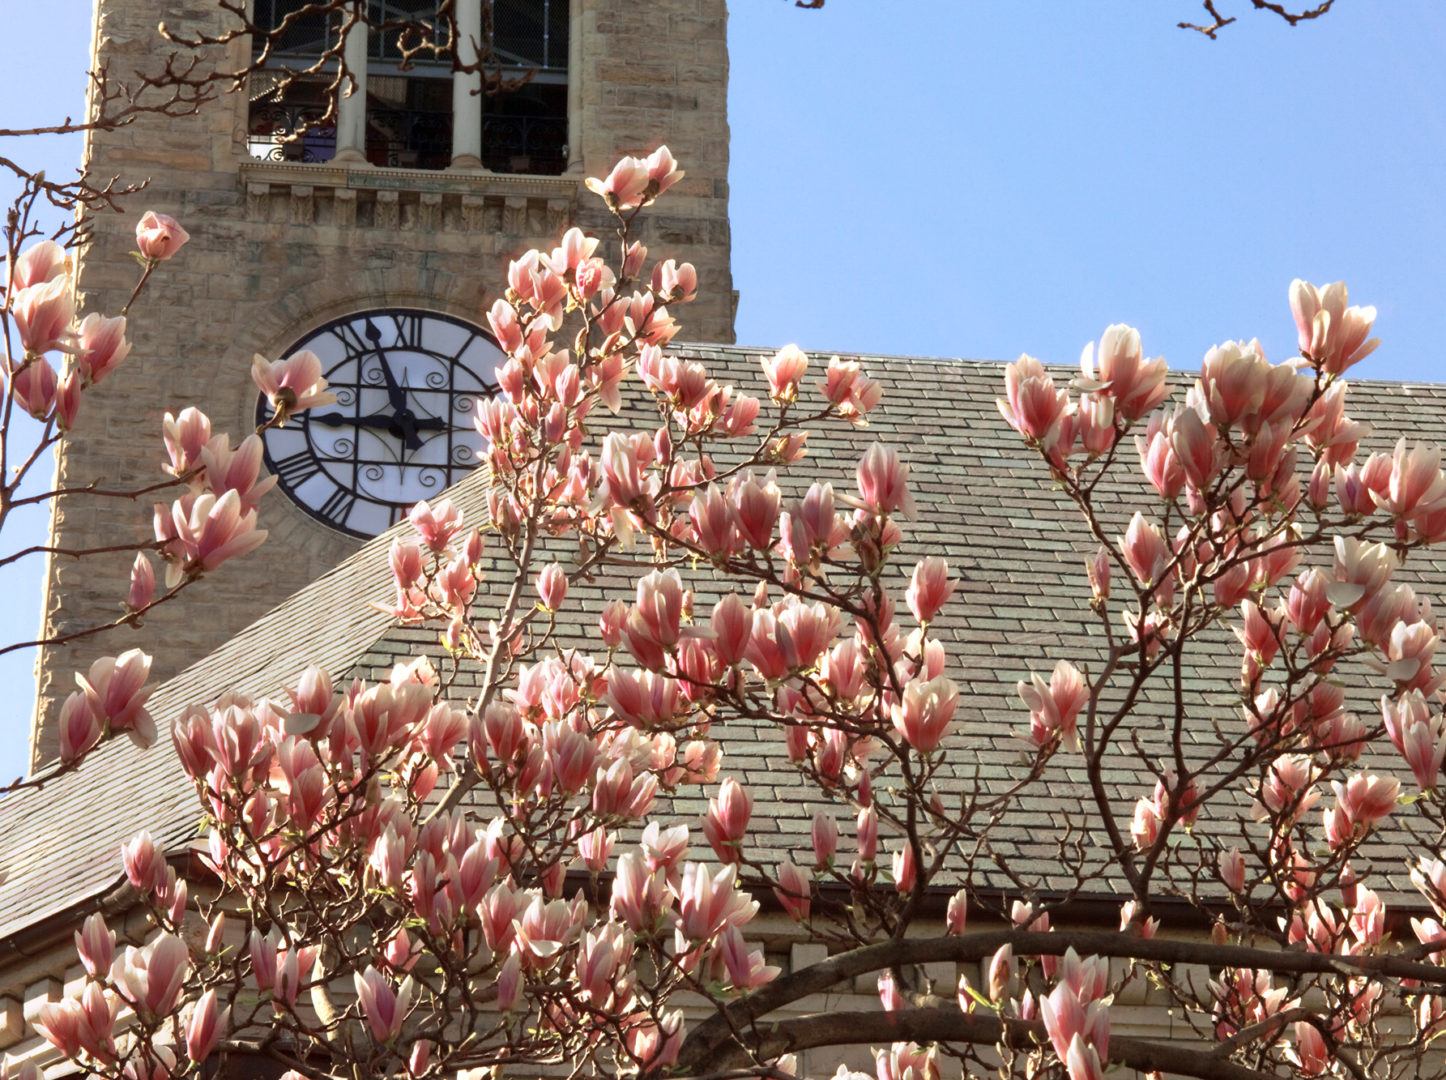 A sugar magnolia in bloom outside McGraw Tower.